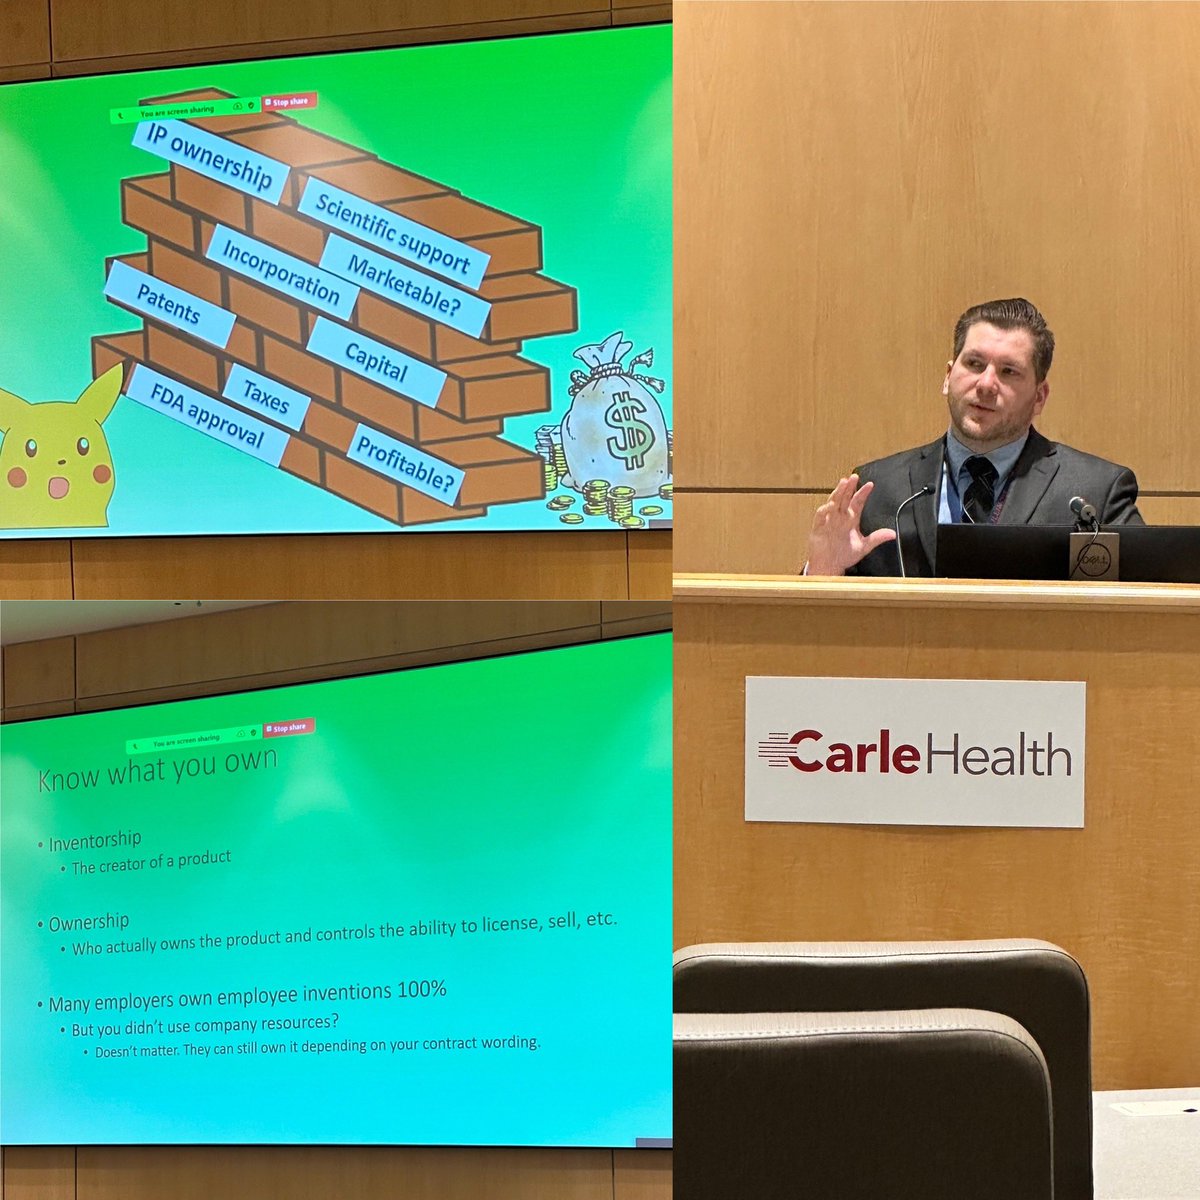 Our very own, @NicRawsonDO presenting his grand rounds on “The Surgeon as an Entrepreneur”. Great job and a really informative talk! @Carle_org @ILLINOISmed @CfhSim